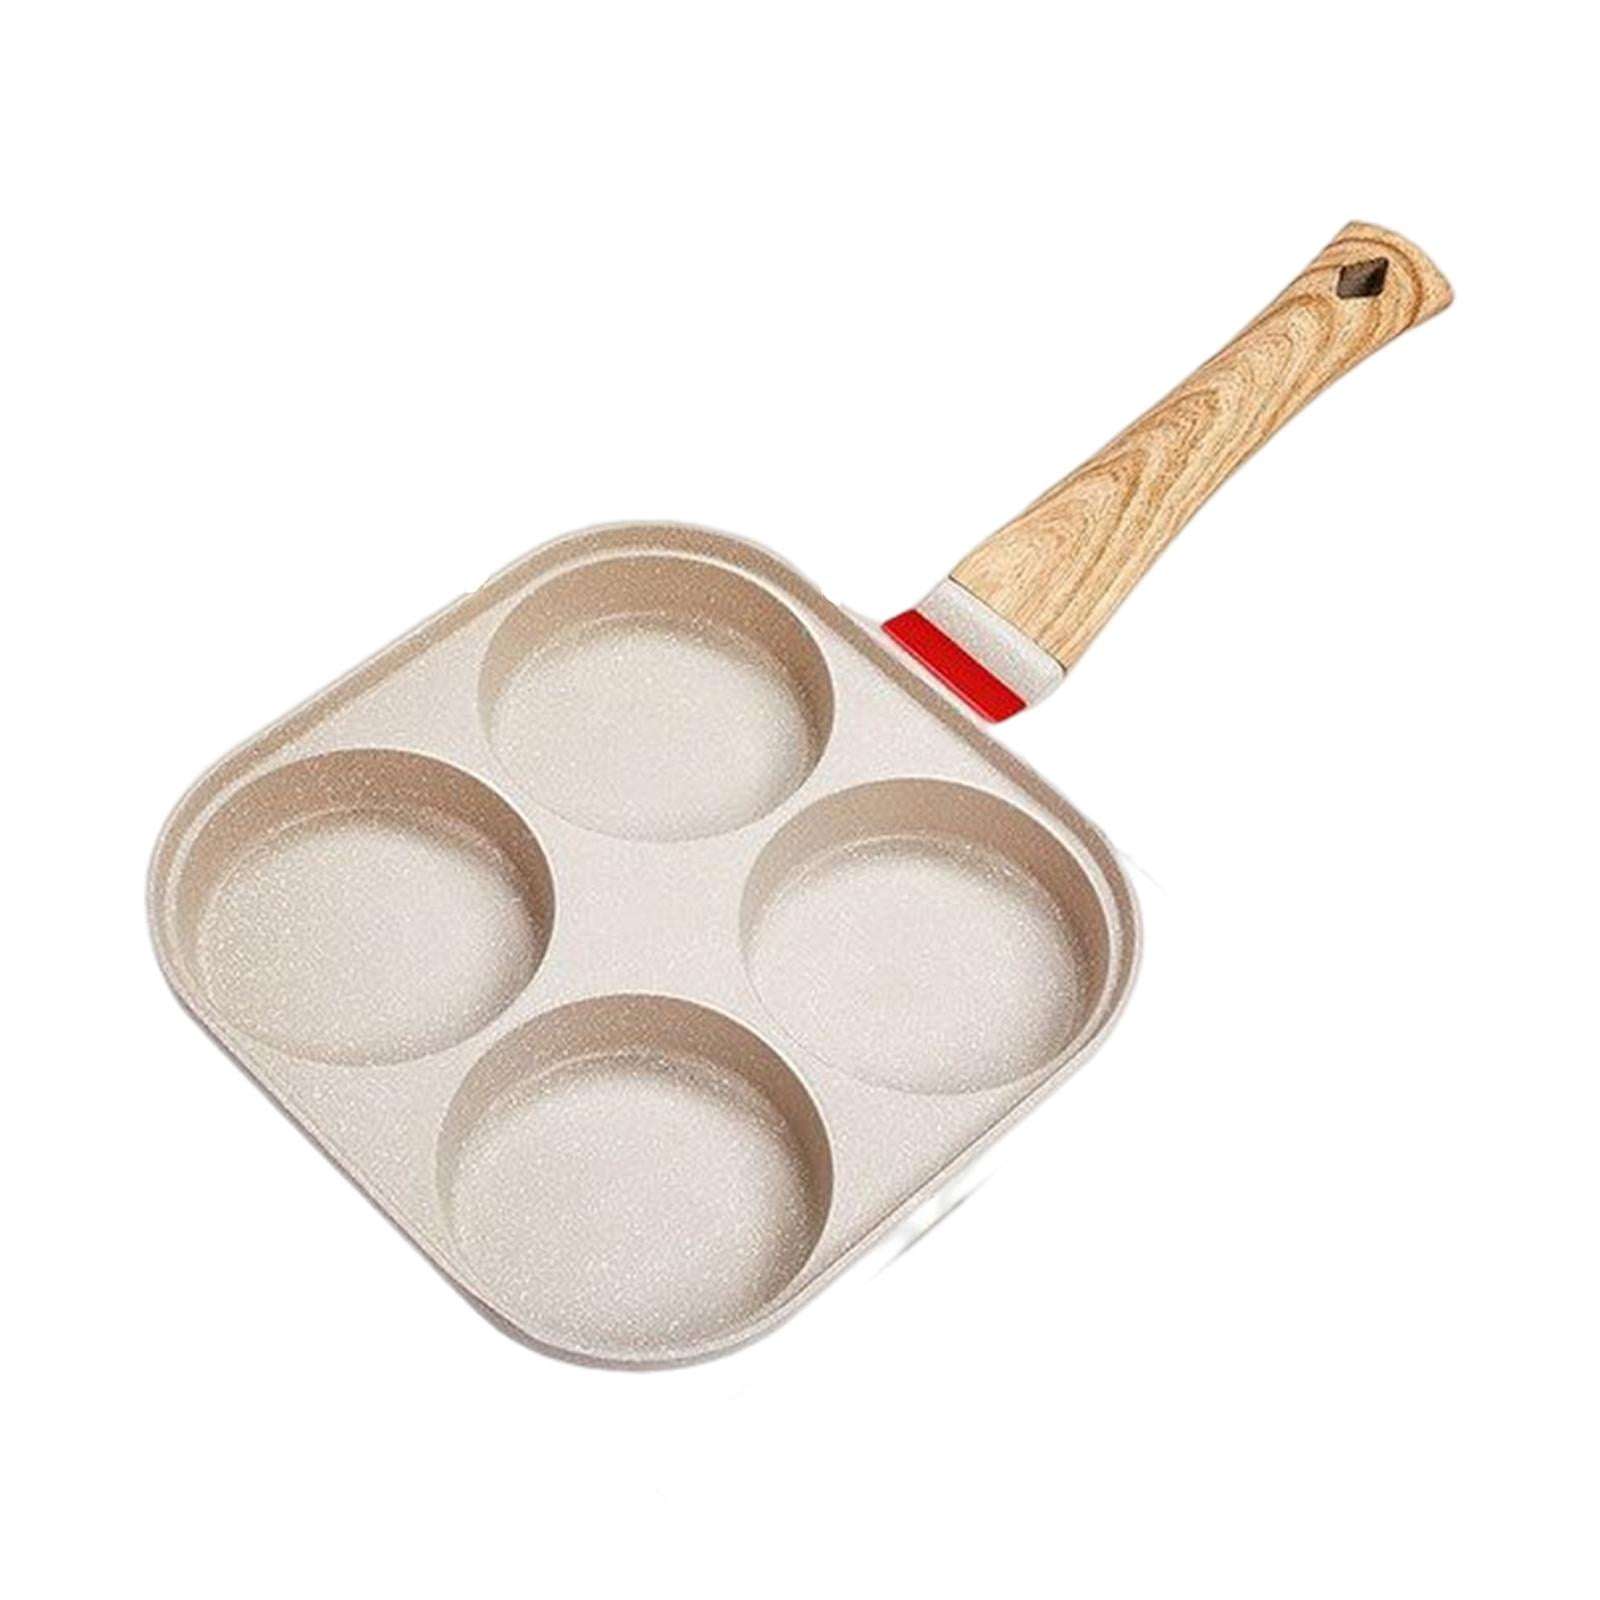  Restaurantware 4 Inch Mini Frying Pan, 1 Round Egg Pan - With  Handle, Dishwasher Safe, Silver Stainless Steel Small Frying Pan, Hanging  Hole, For Scrambles, Appetizers, Or Desserts: Home & Kitchen